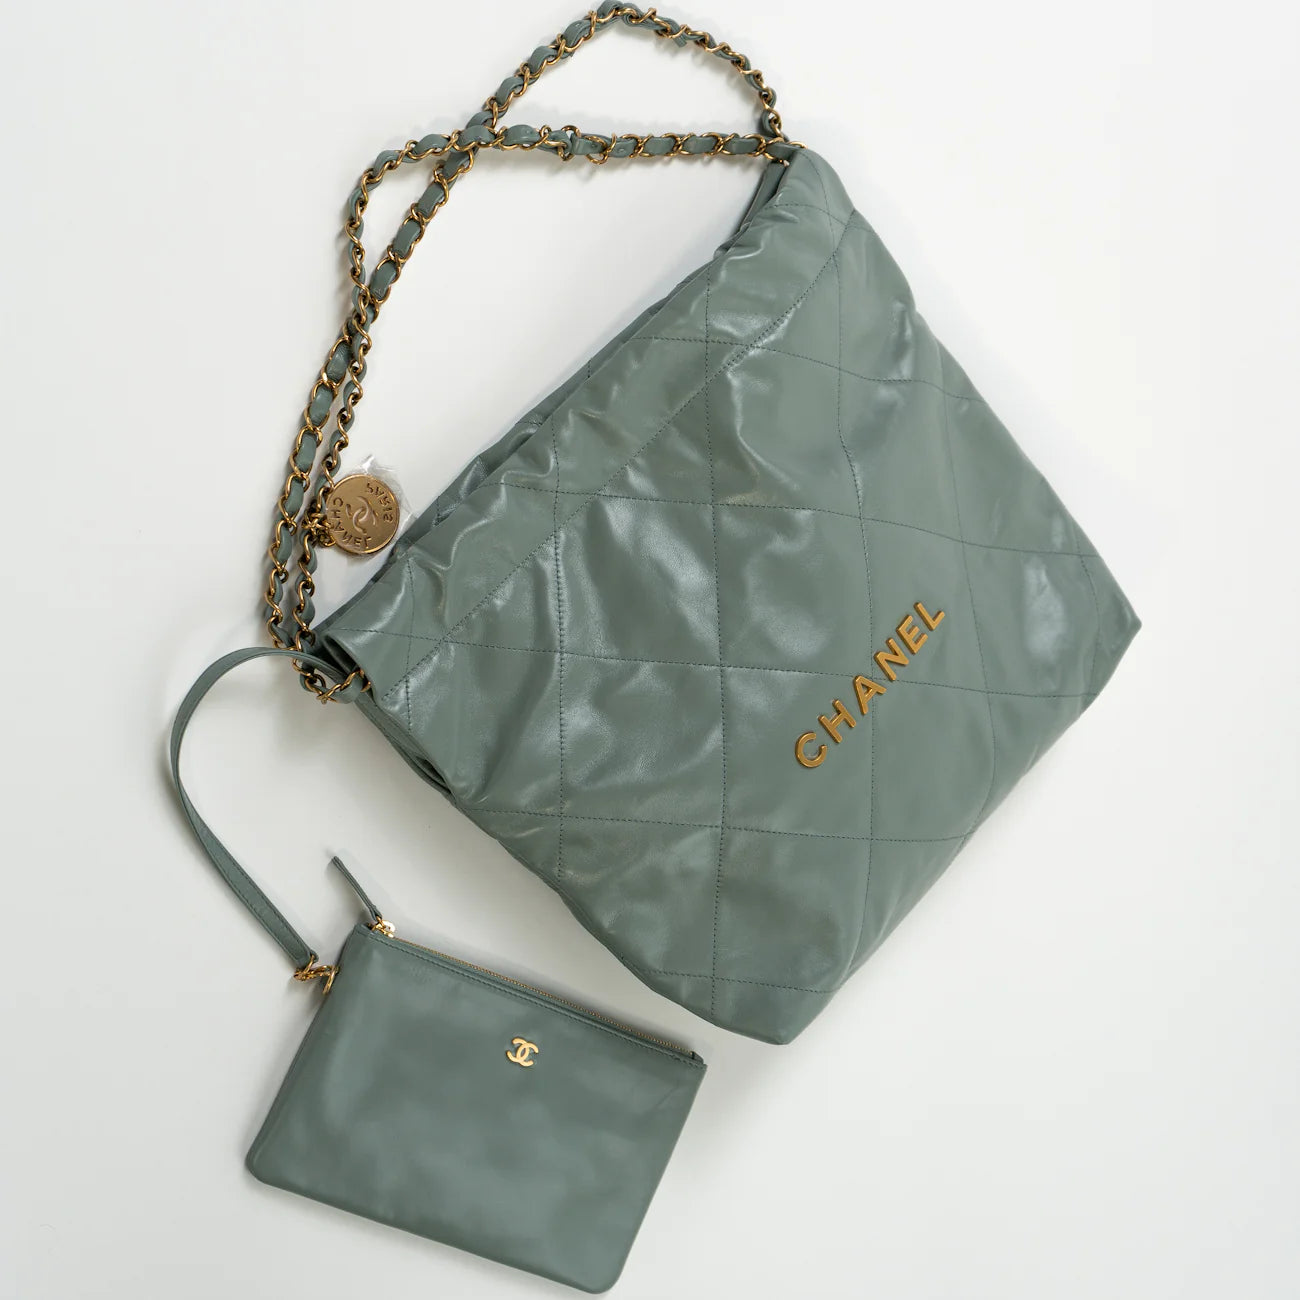 23c Small Grey Green Calfskin Quilted Chanel 22 Drawstring Bag